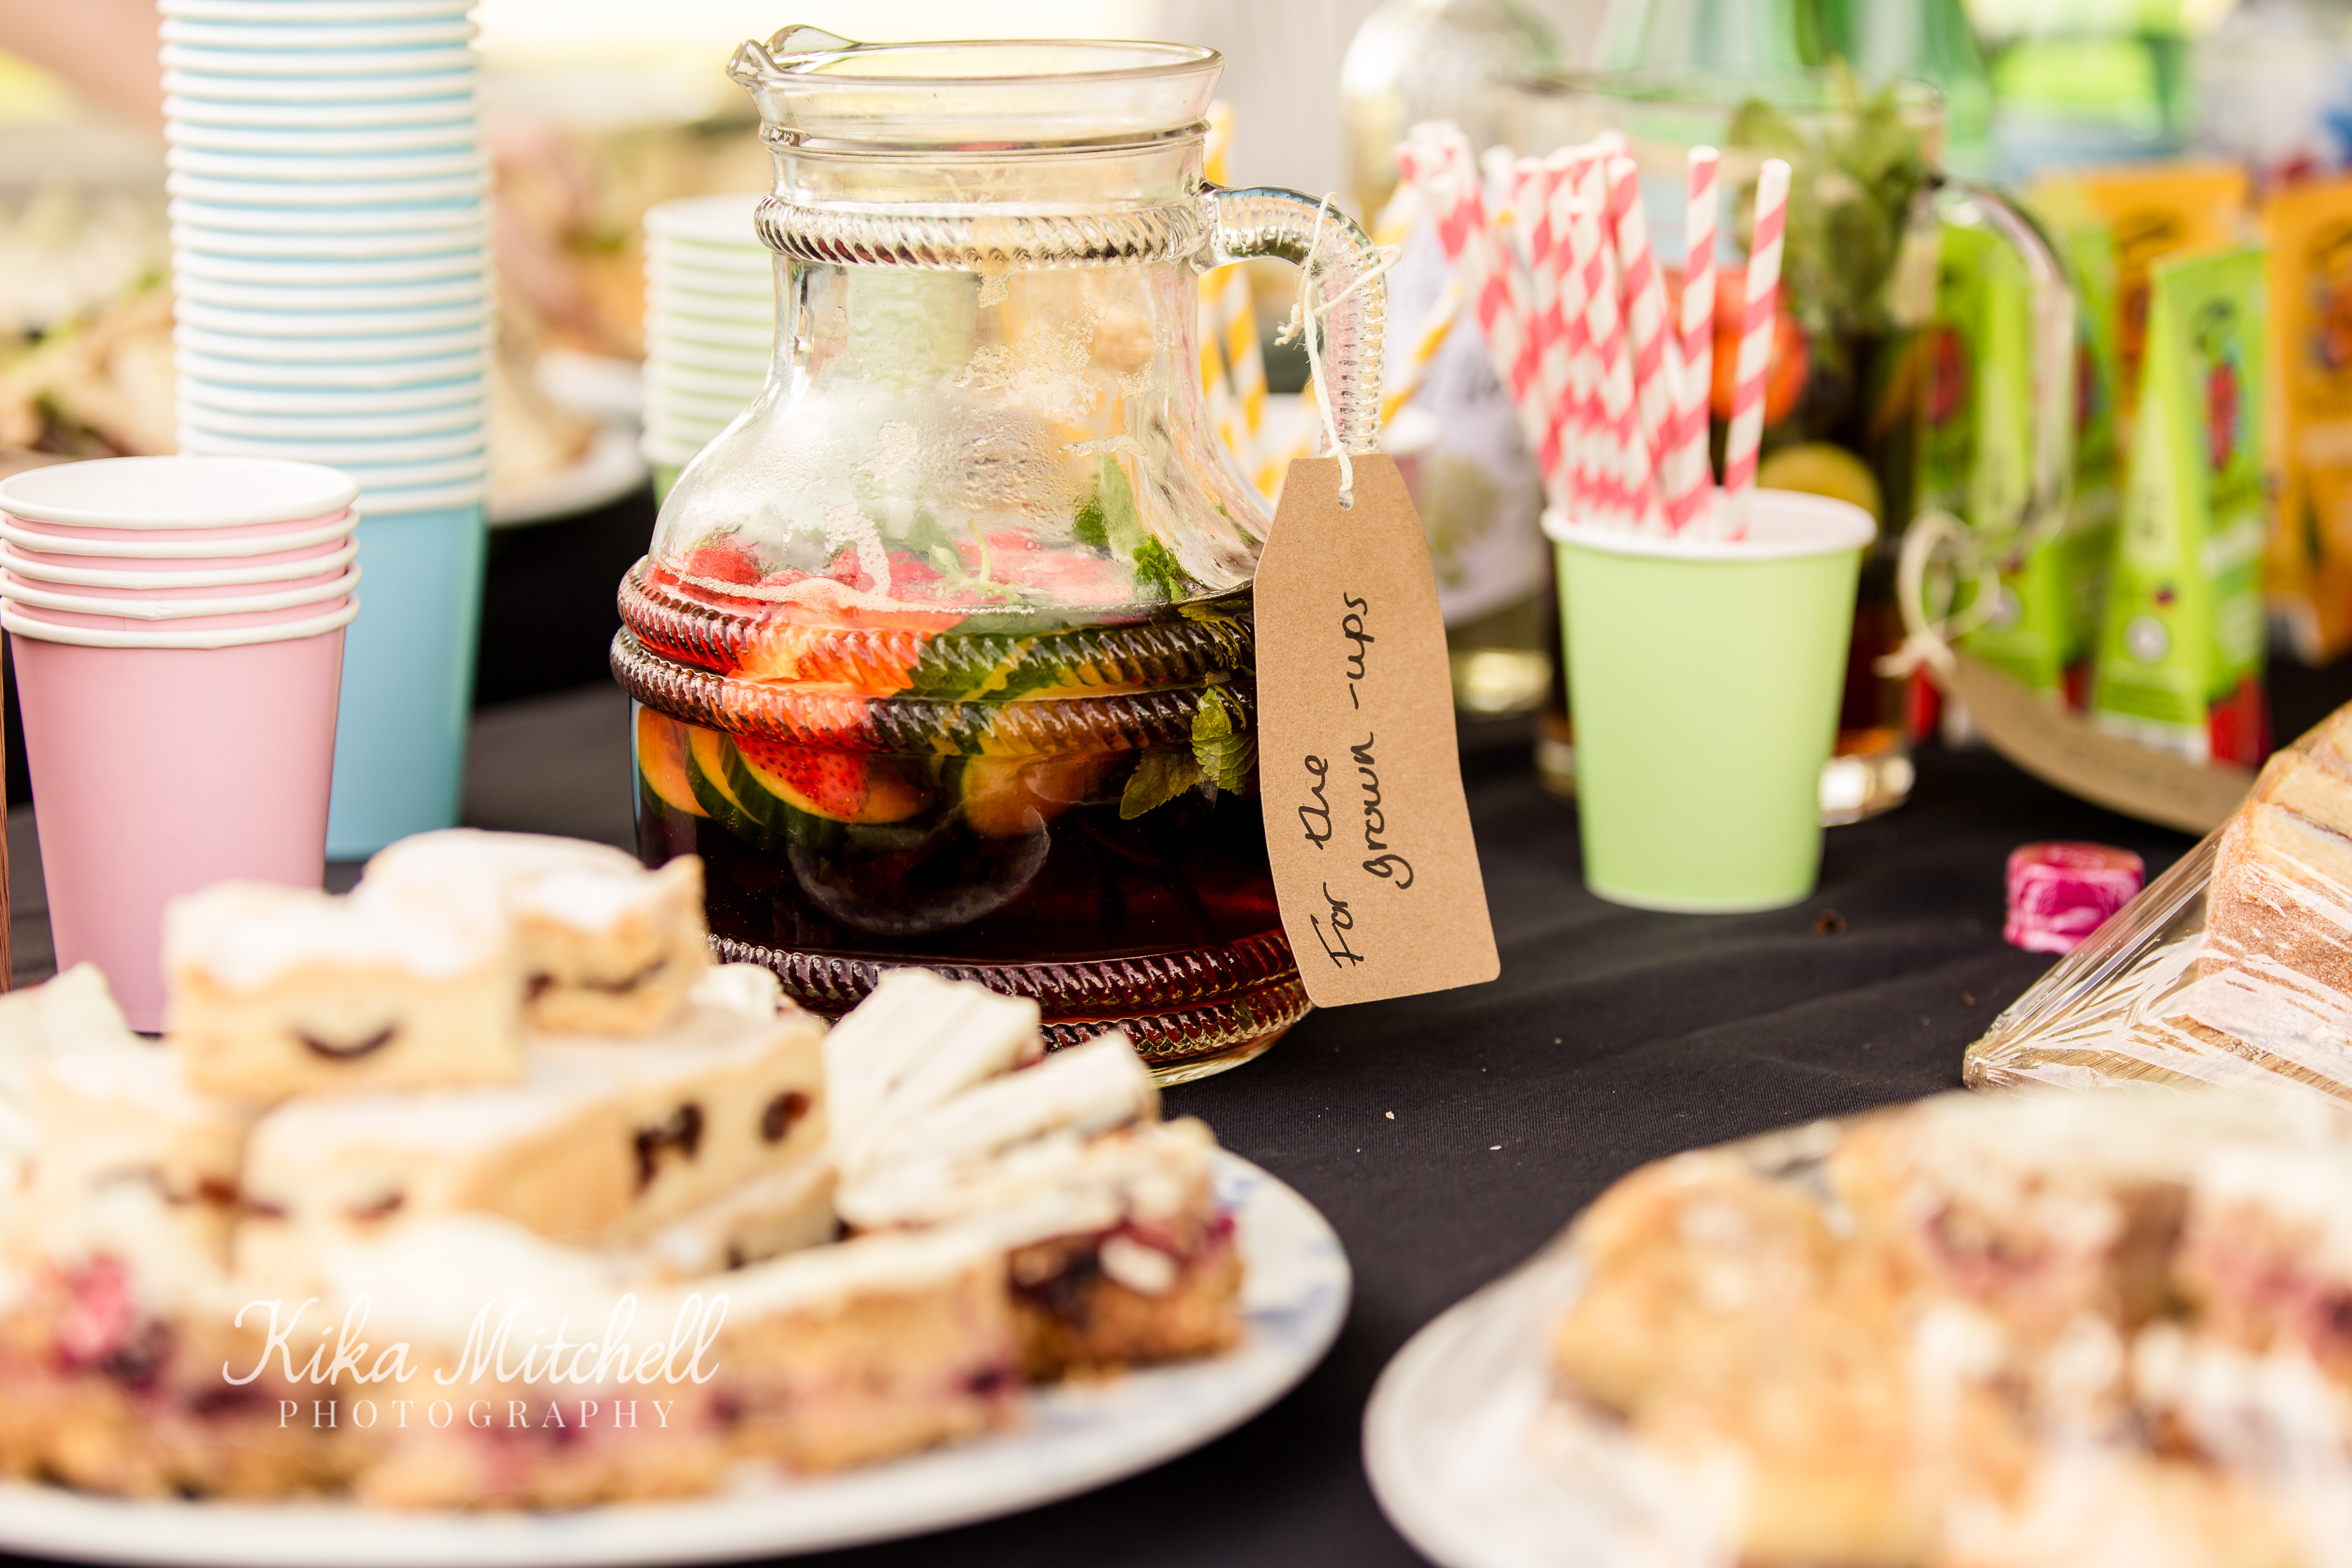 Pimms at Audley End CEWE photoworld event by Kika Mitchell Chelmsford photographer